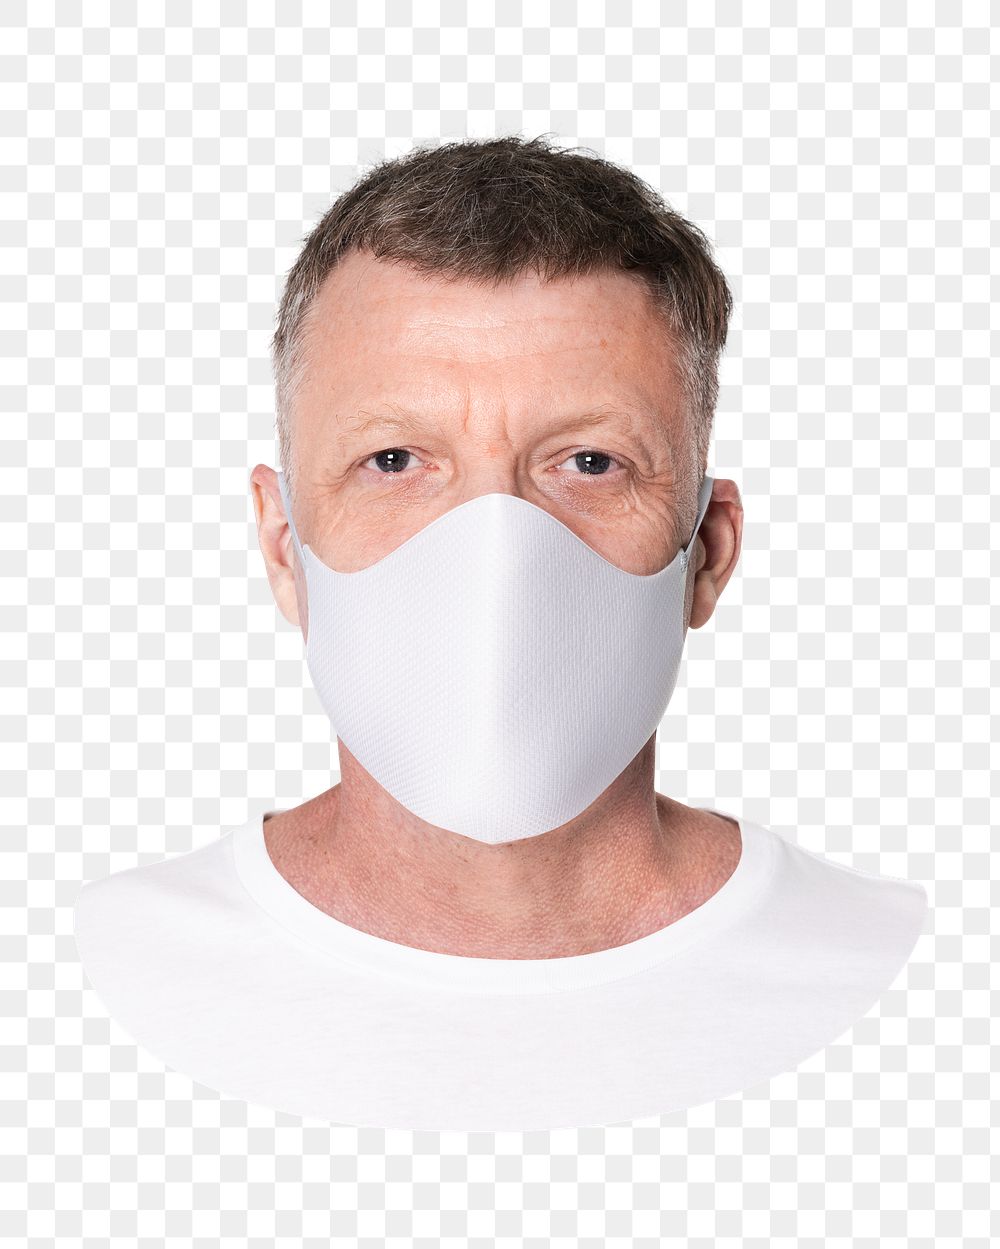 Png mature man in white mask, transparent background